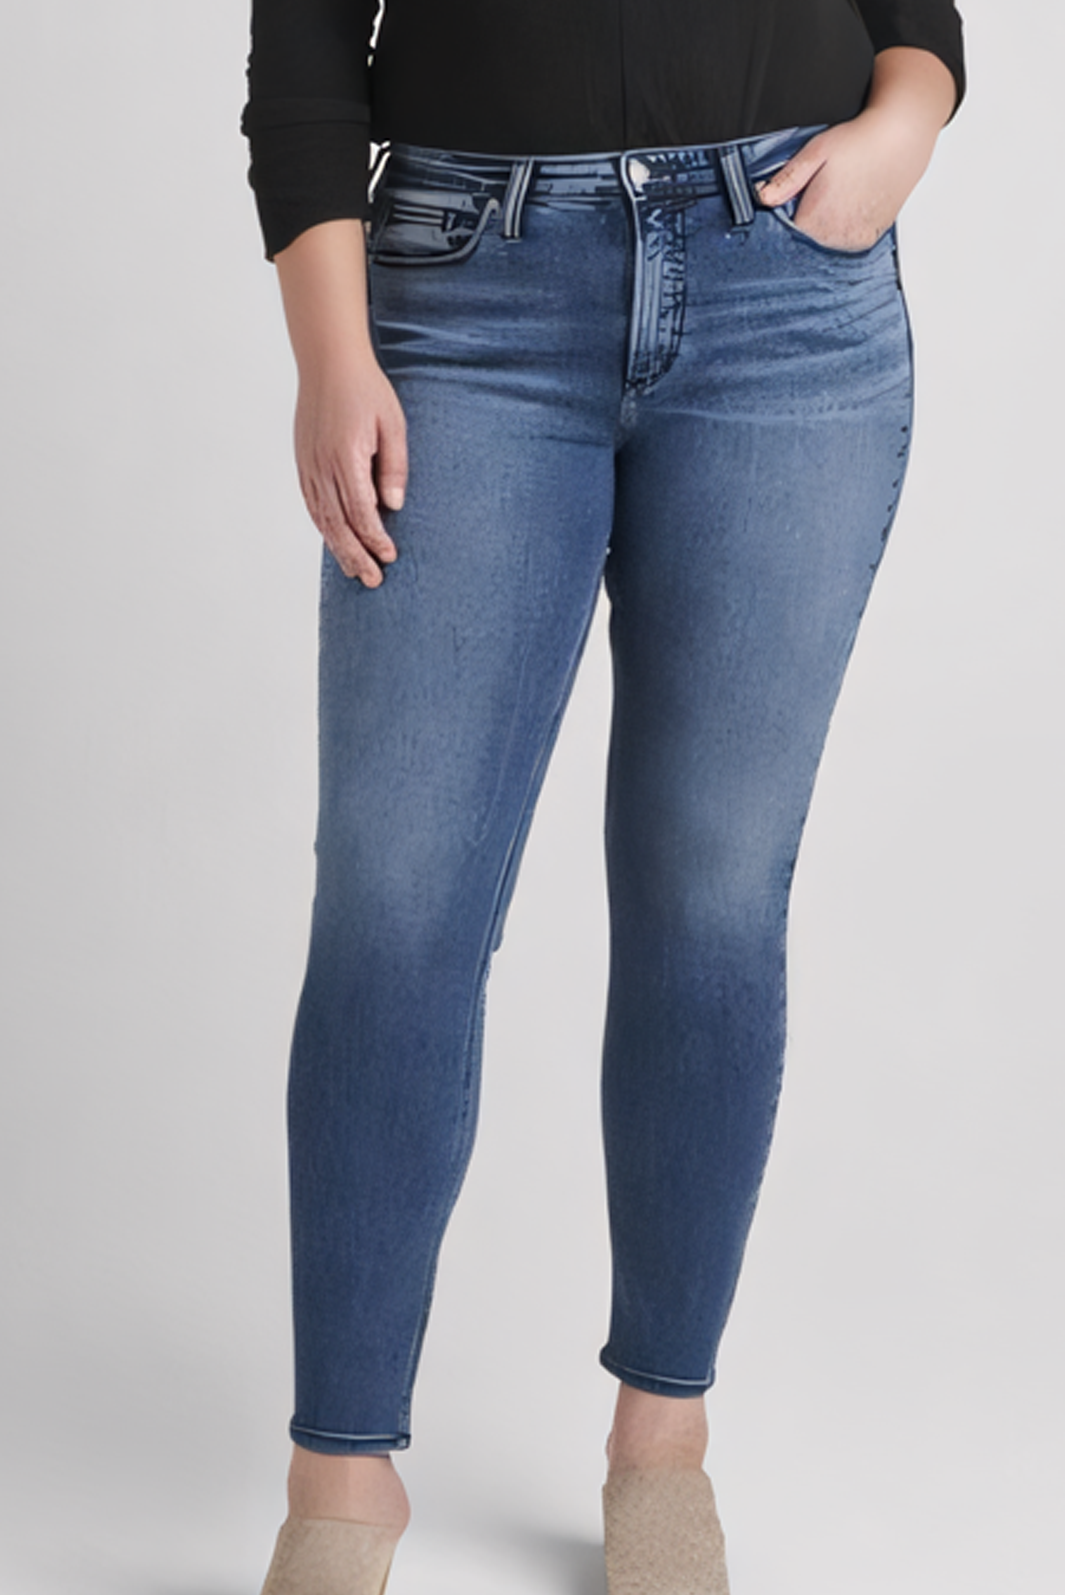 Silver Jeans Plus Size Most Wanted Skinny Jeans